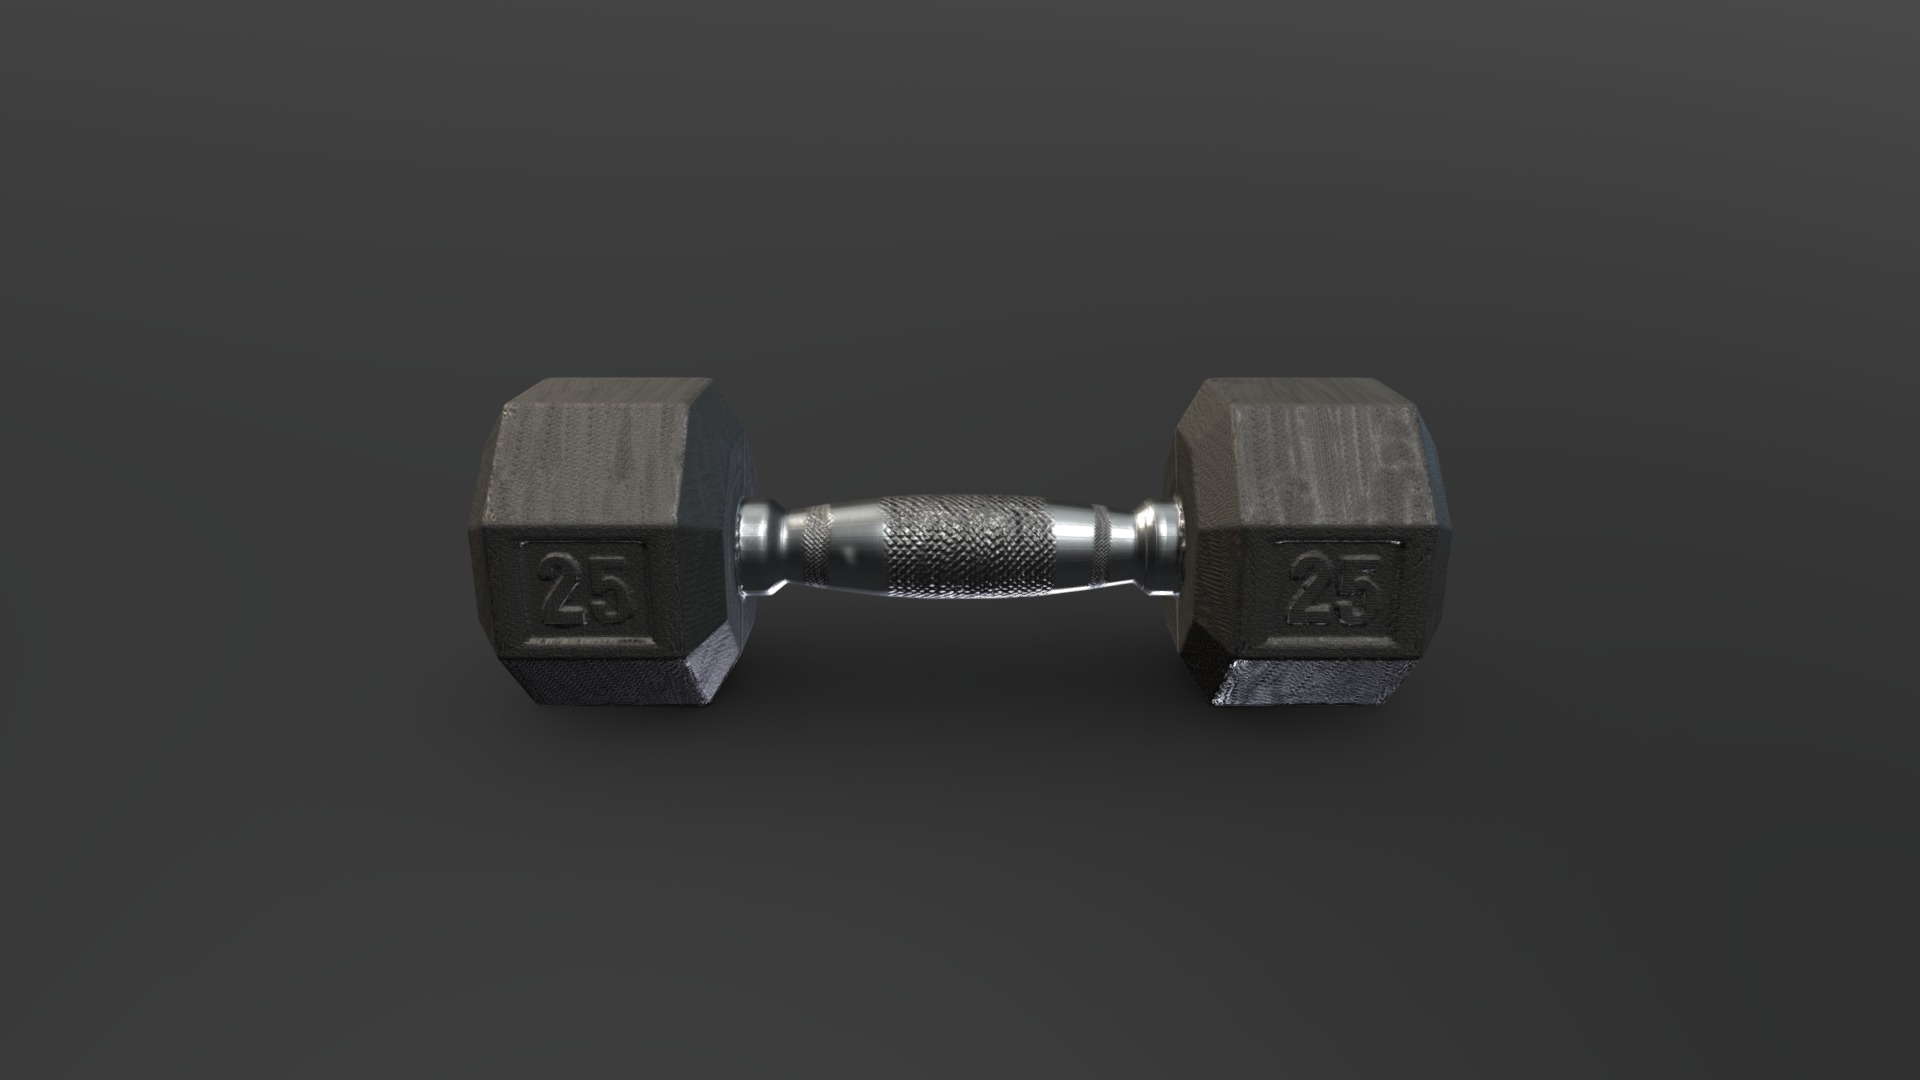 3D model 25 lb dumbbell - This is a 3D model of the 25 lb dumbbell. The 3D model is about a group of metal objects.